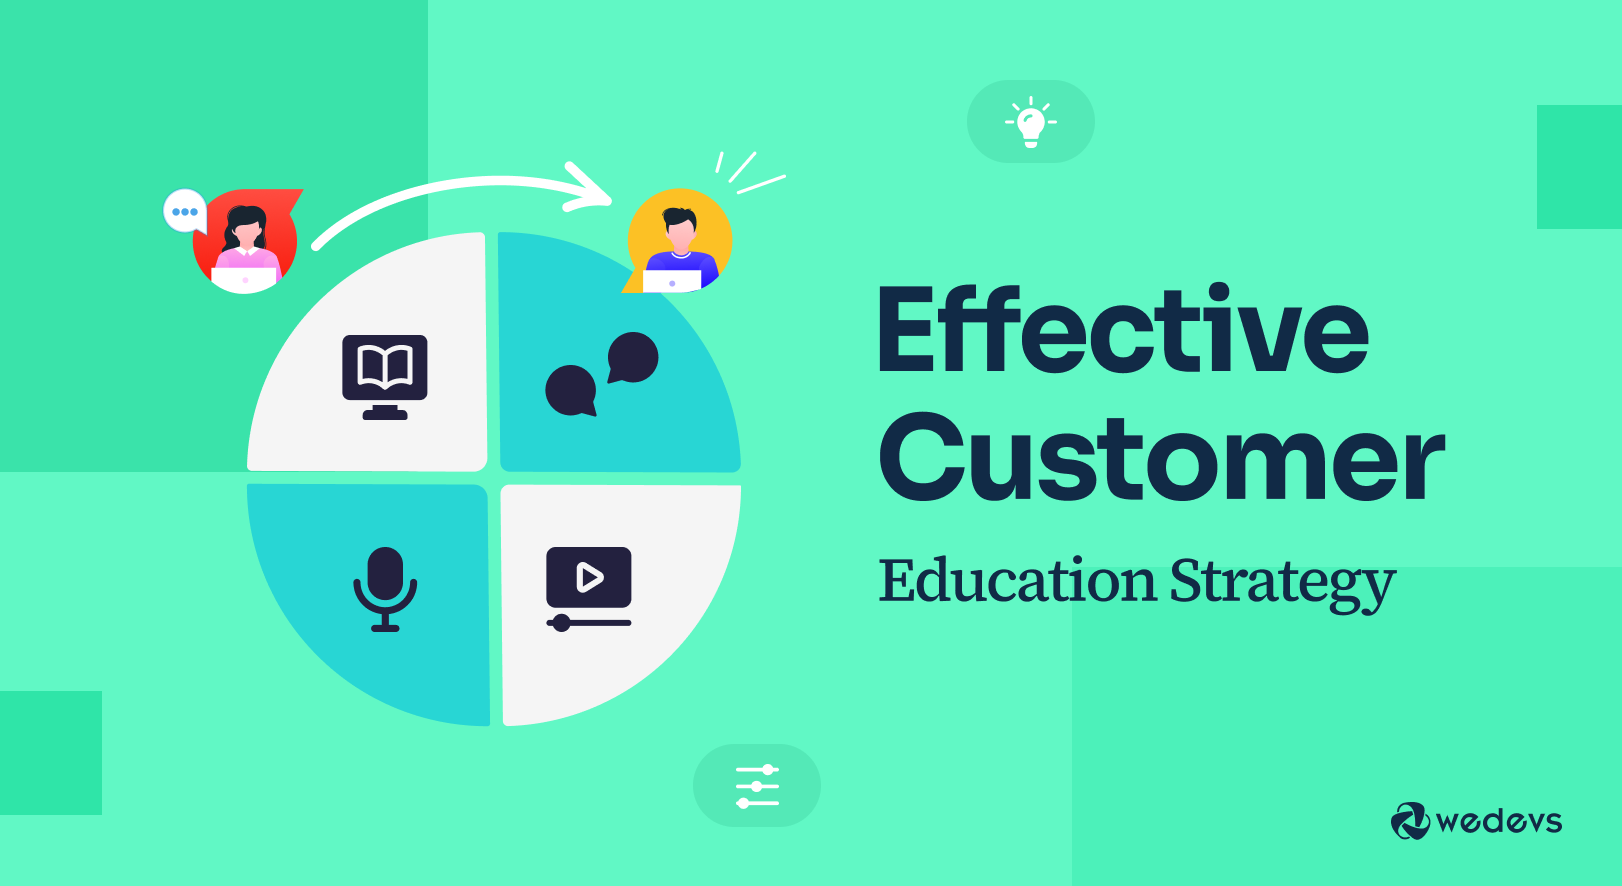 9 Steps to Design an Effective Customer Education Strategy